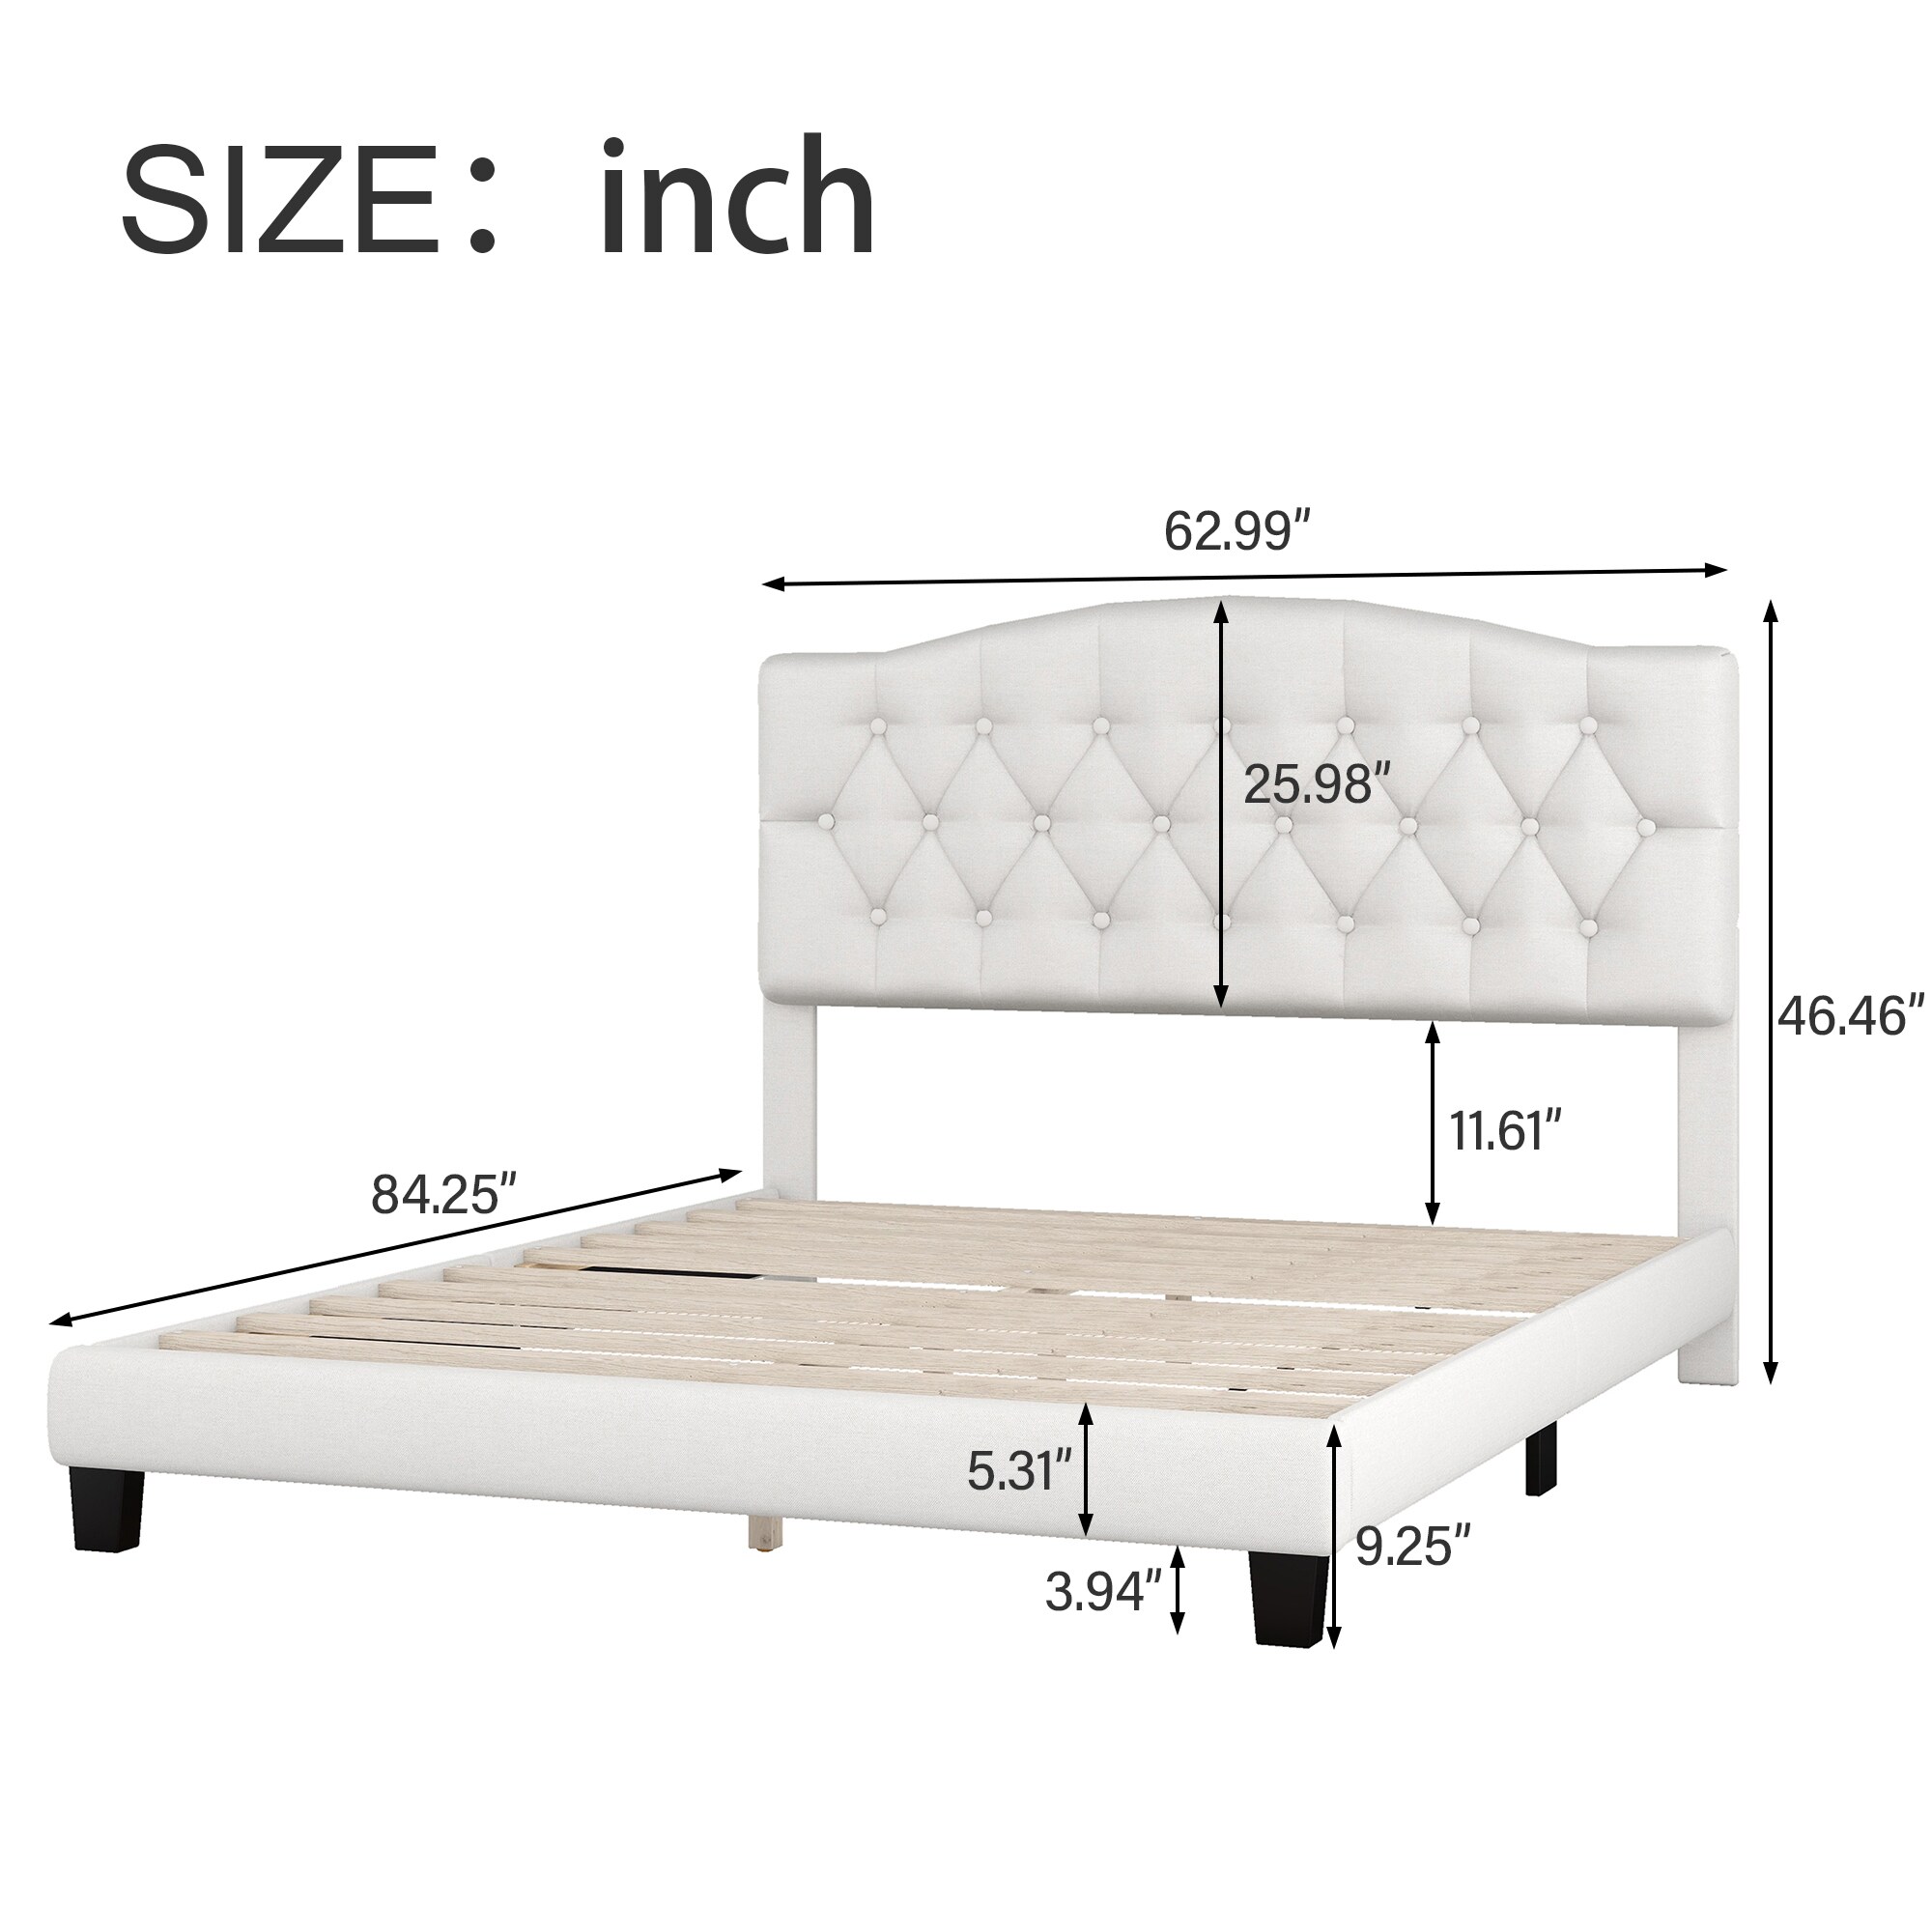 Clihome Upholstered Platform Bed, Low Profile Queen Contemporary Bed in ...